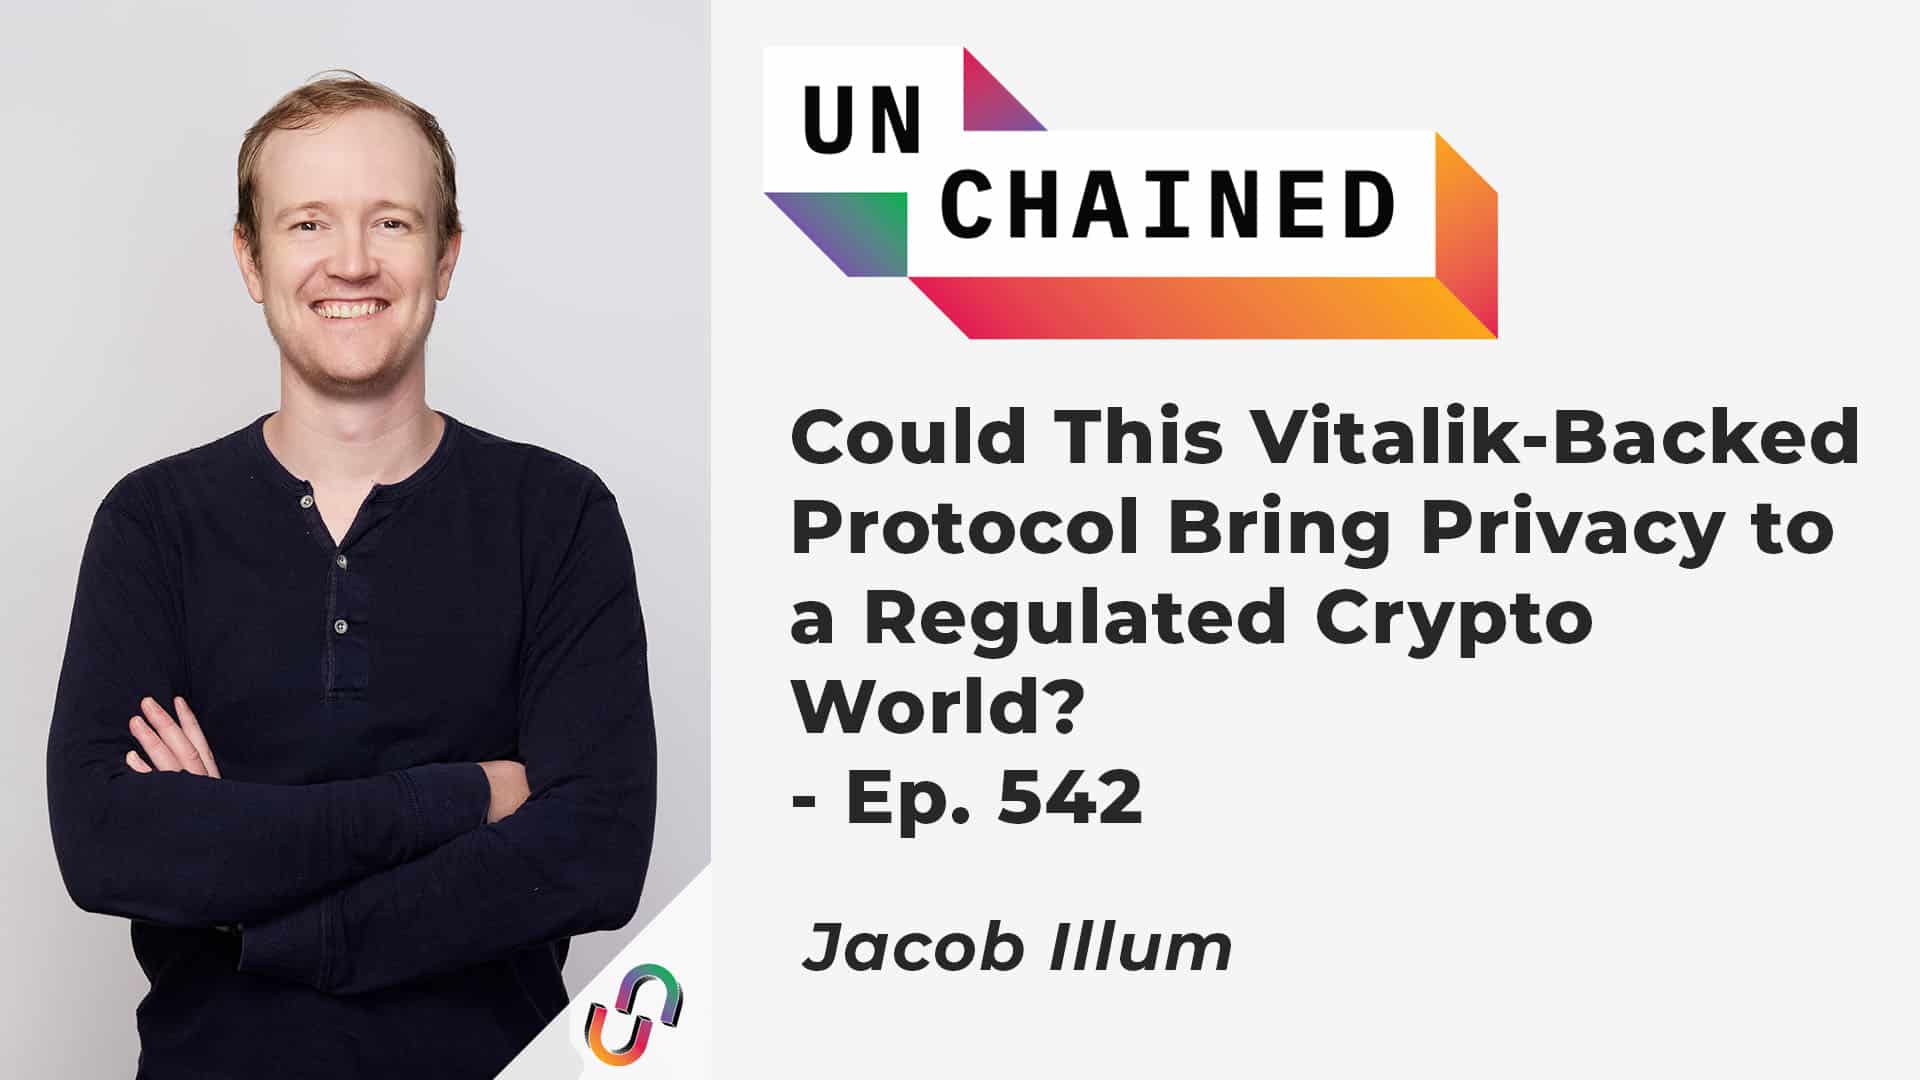 Could This Vitalik-Backed Protocol Bring Privacy to a Regulated Crypto World? - Ep. 542